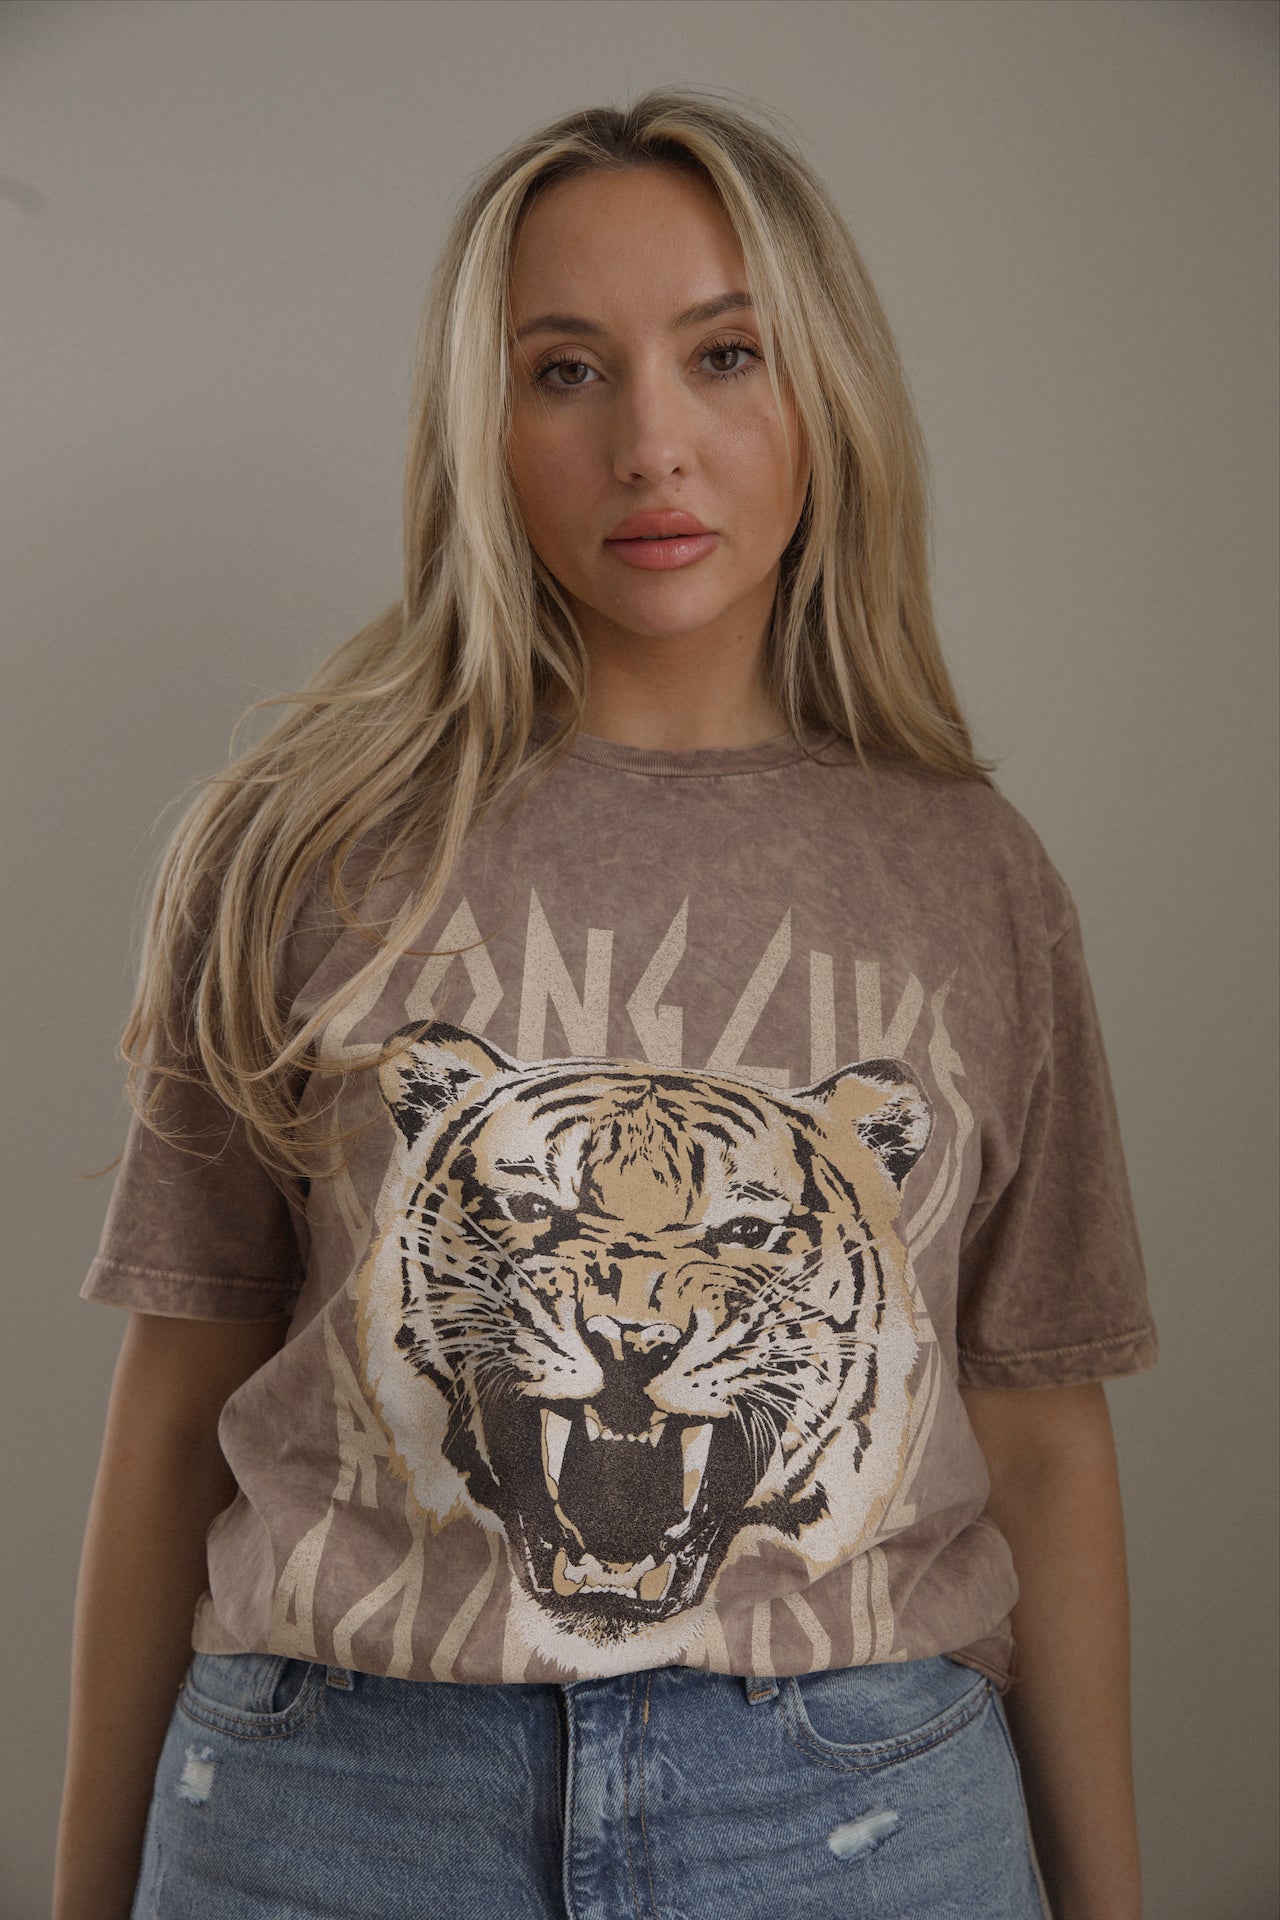 tiger print long live rock and roll graphic tee on a brown cotton tshirt